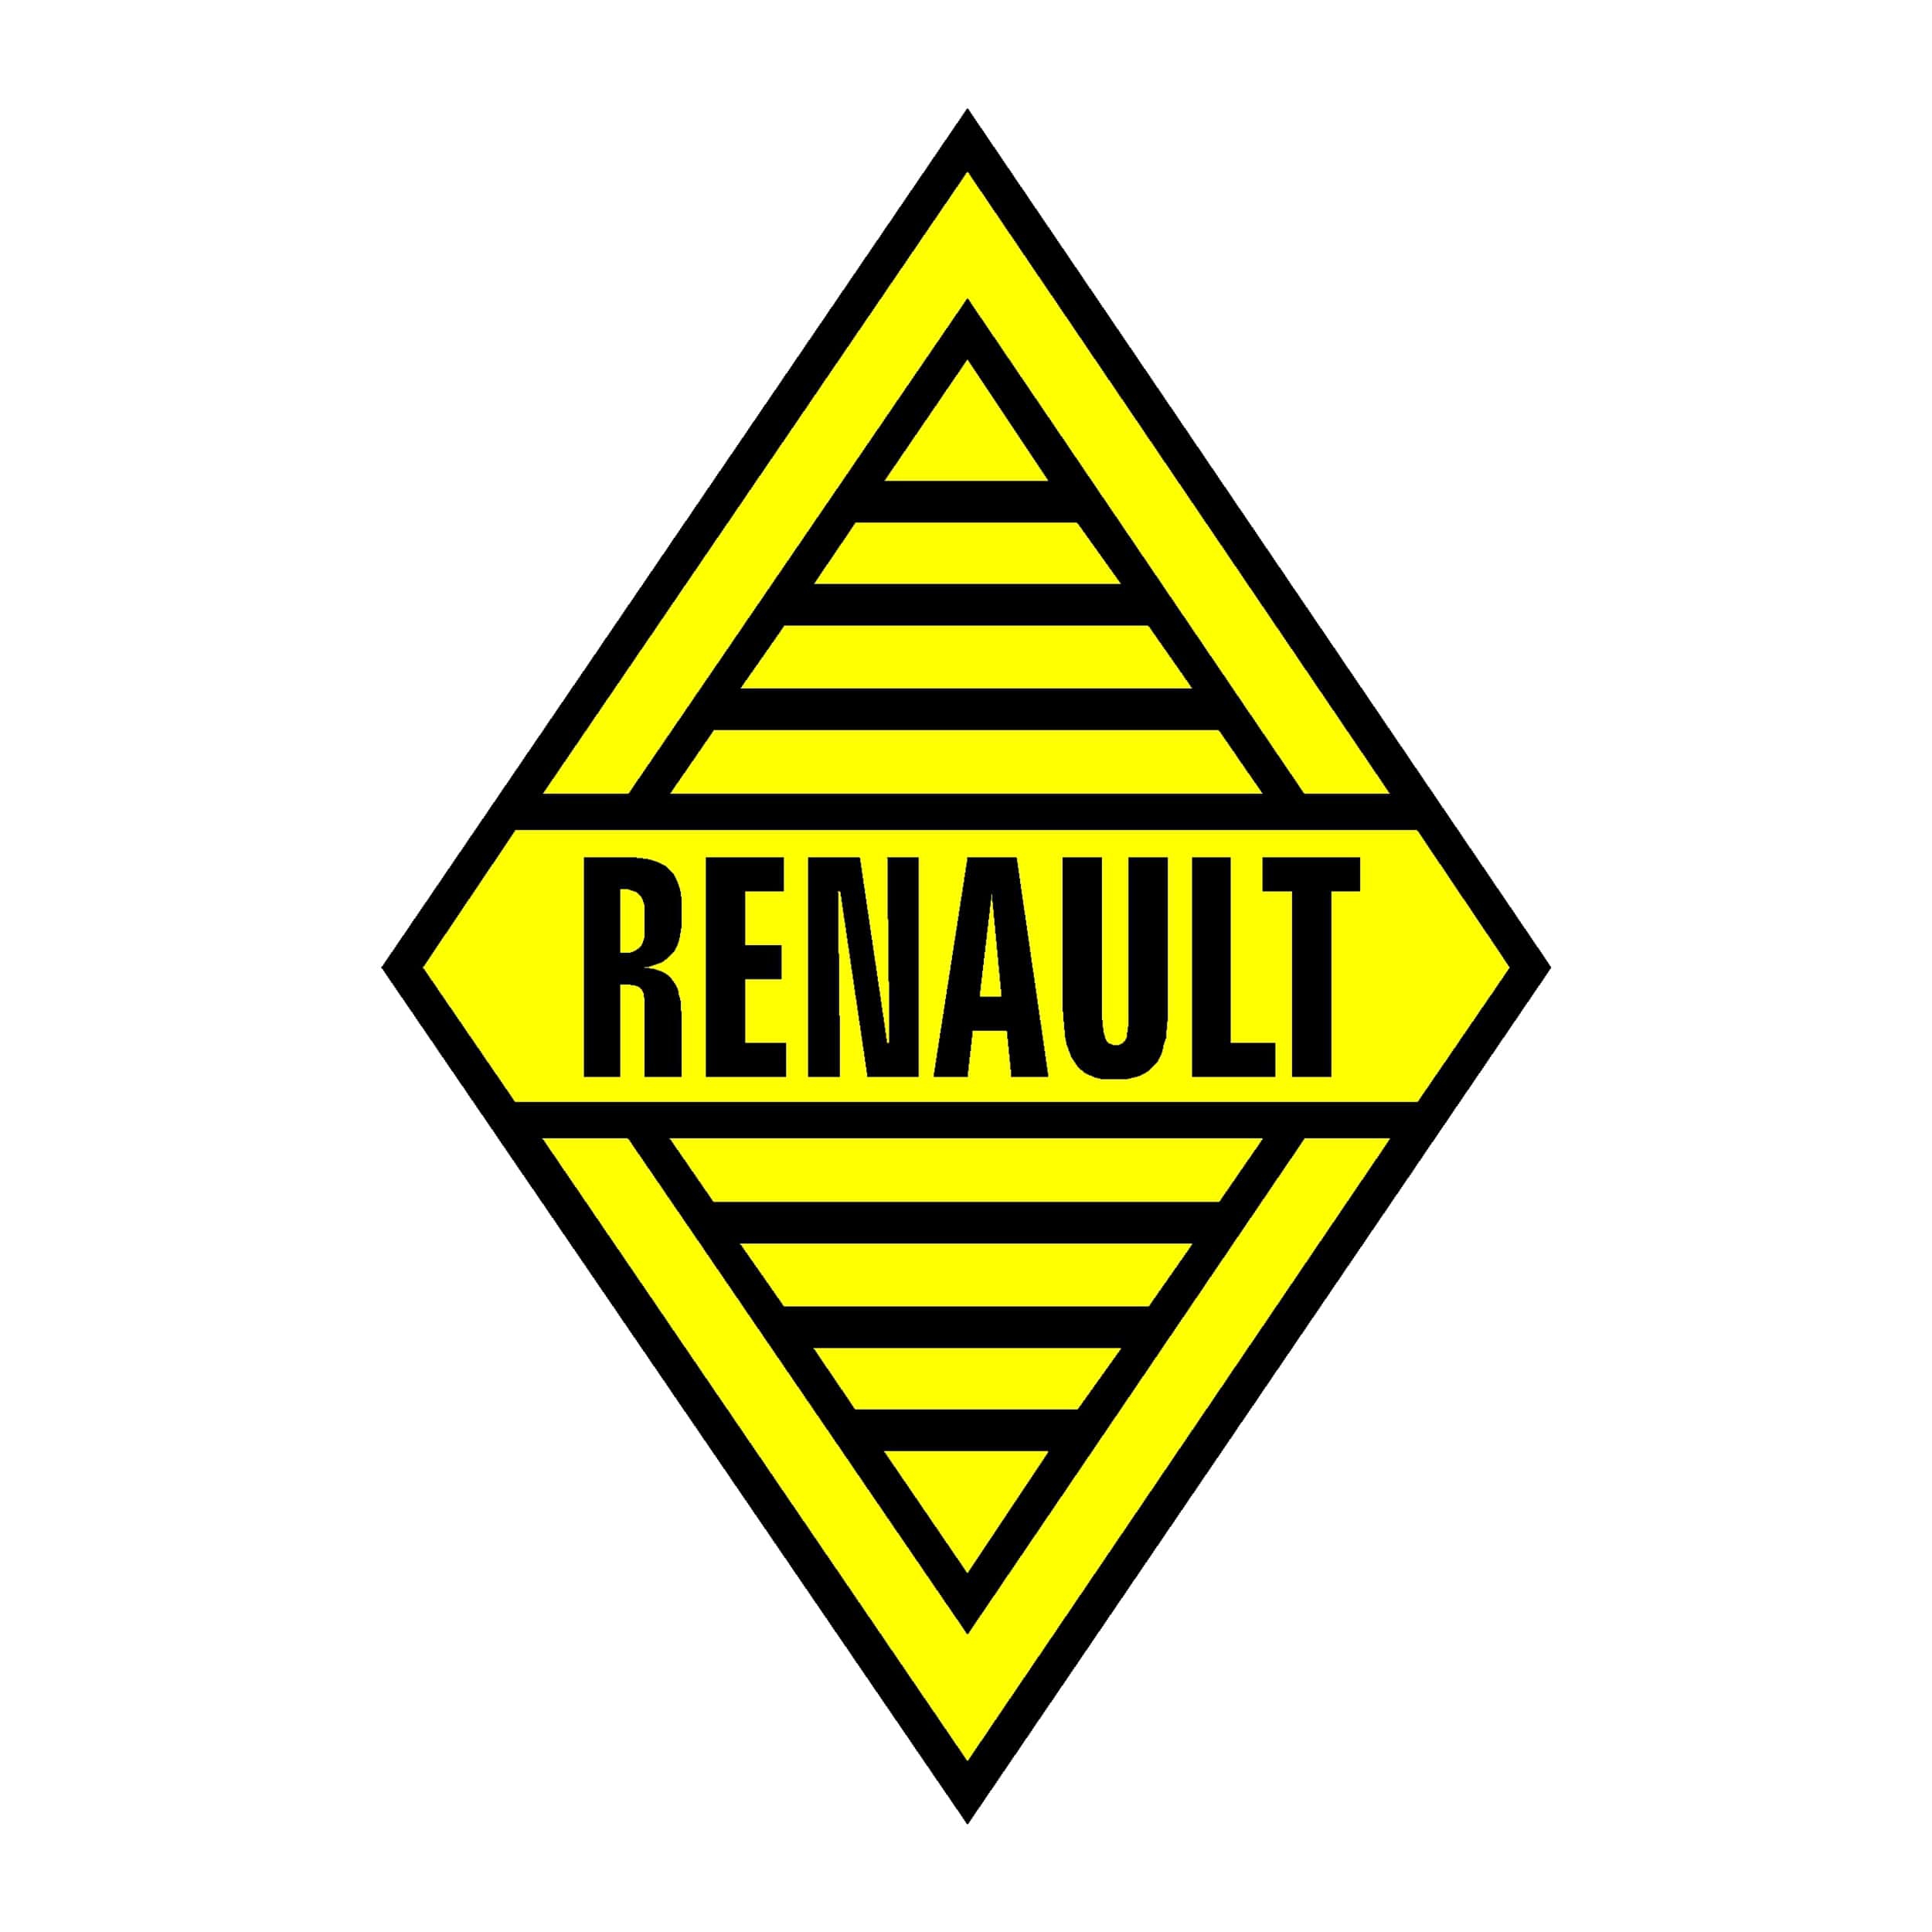 stickers-ref-61-renault-sport-logo-losange-1960-1972-voiture-tuning-competition-deco-adhesive-auto-racing-rallye-min